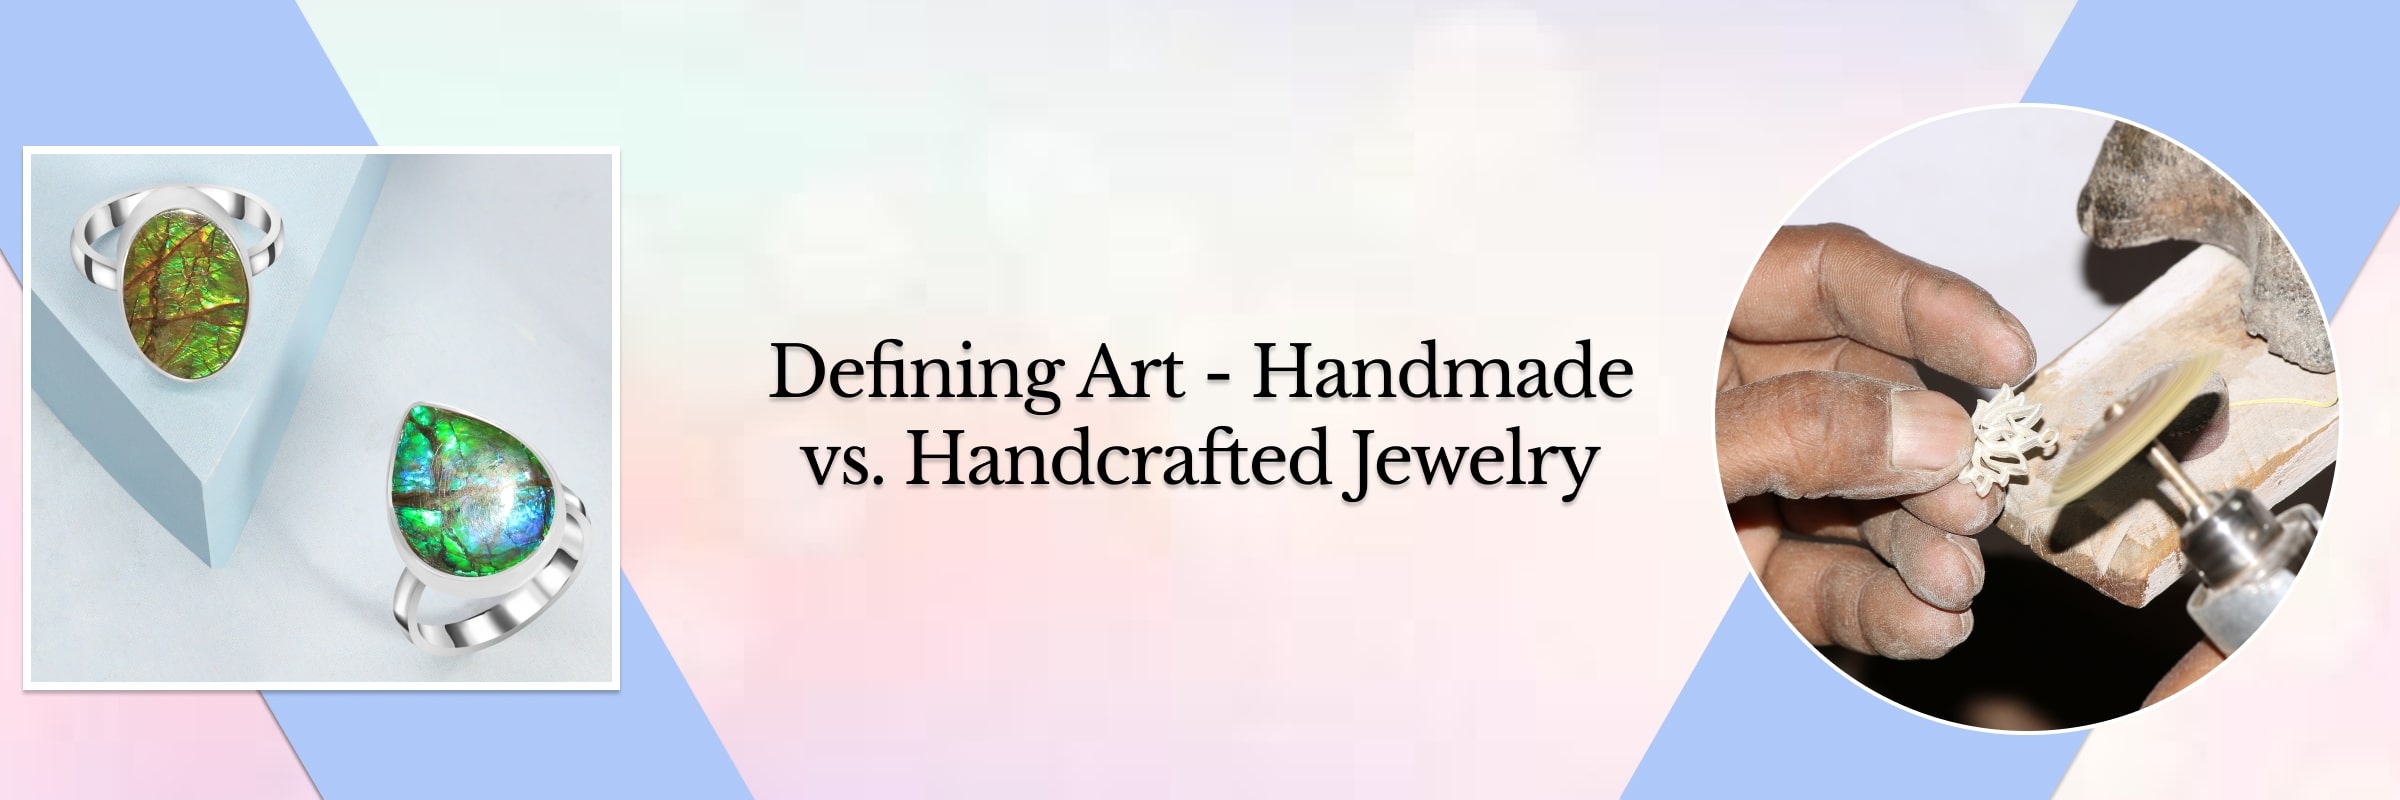 What is Handmade Jewelry or Handcrafted Jewelry